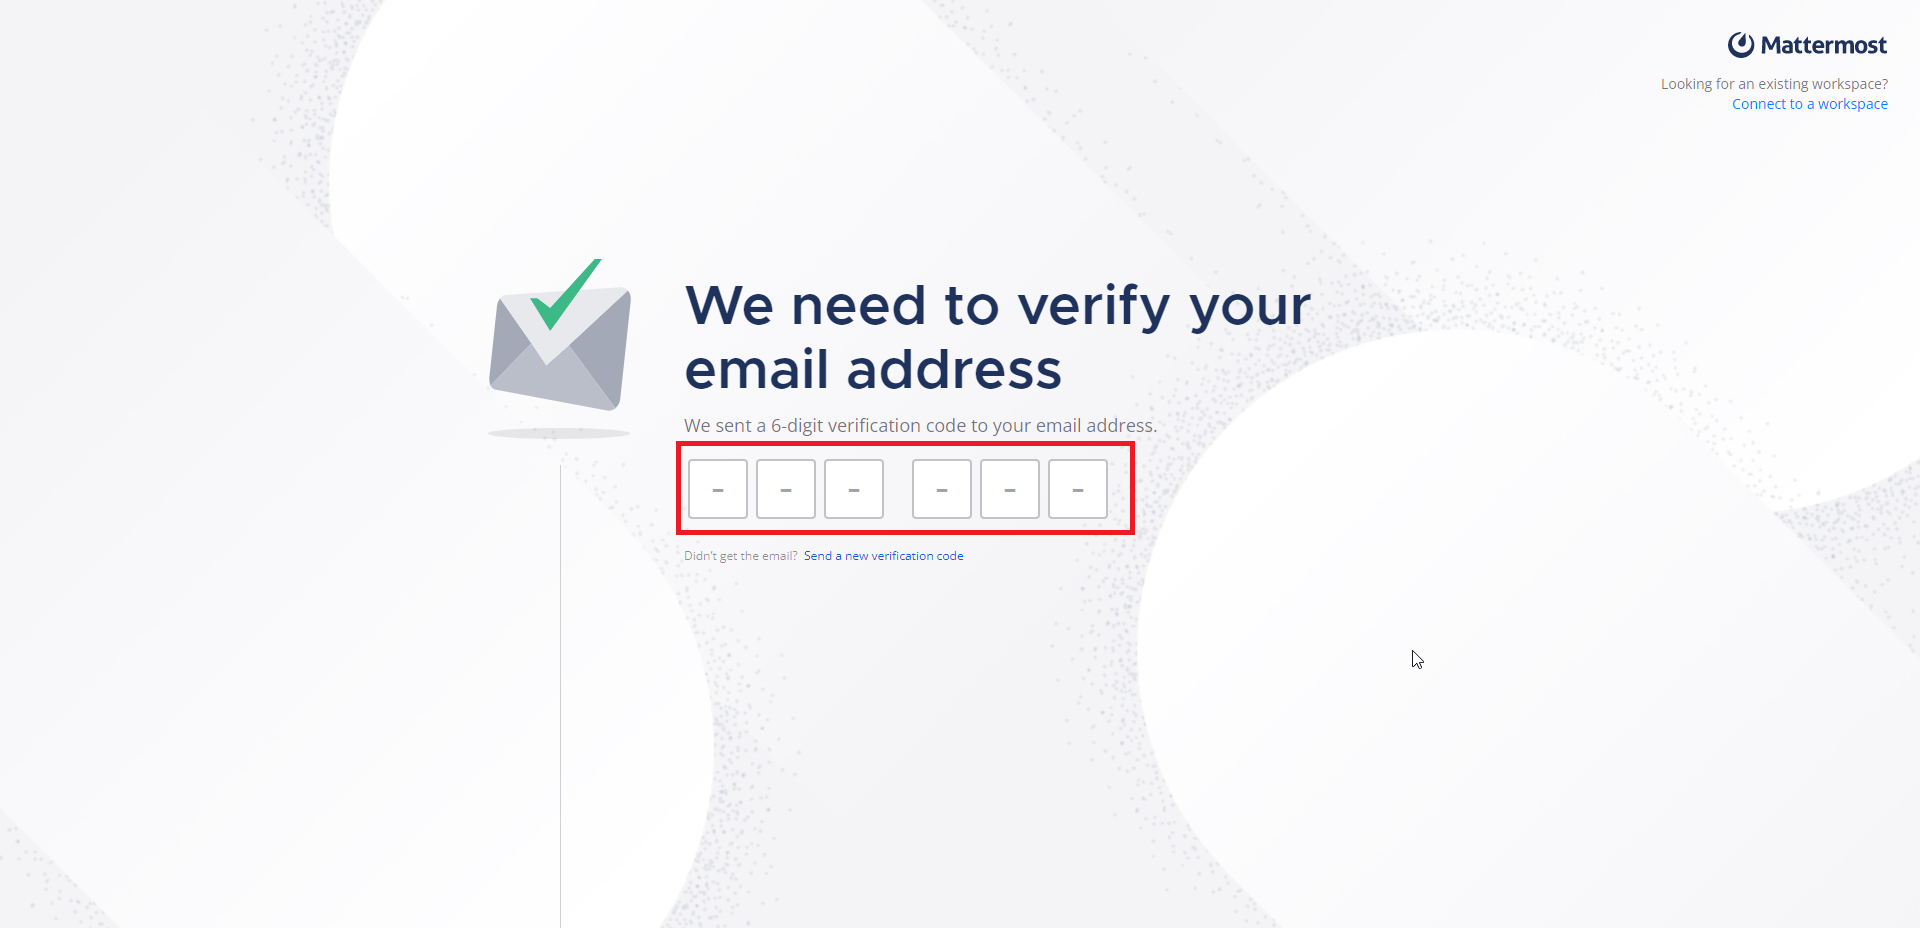 We need to verify your email address画面